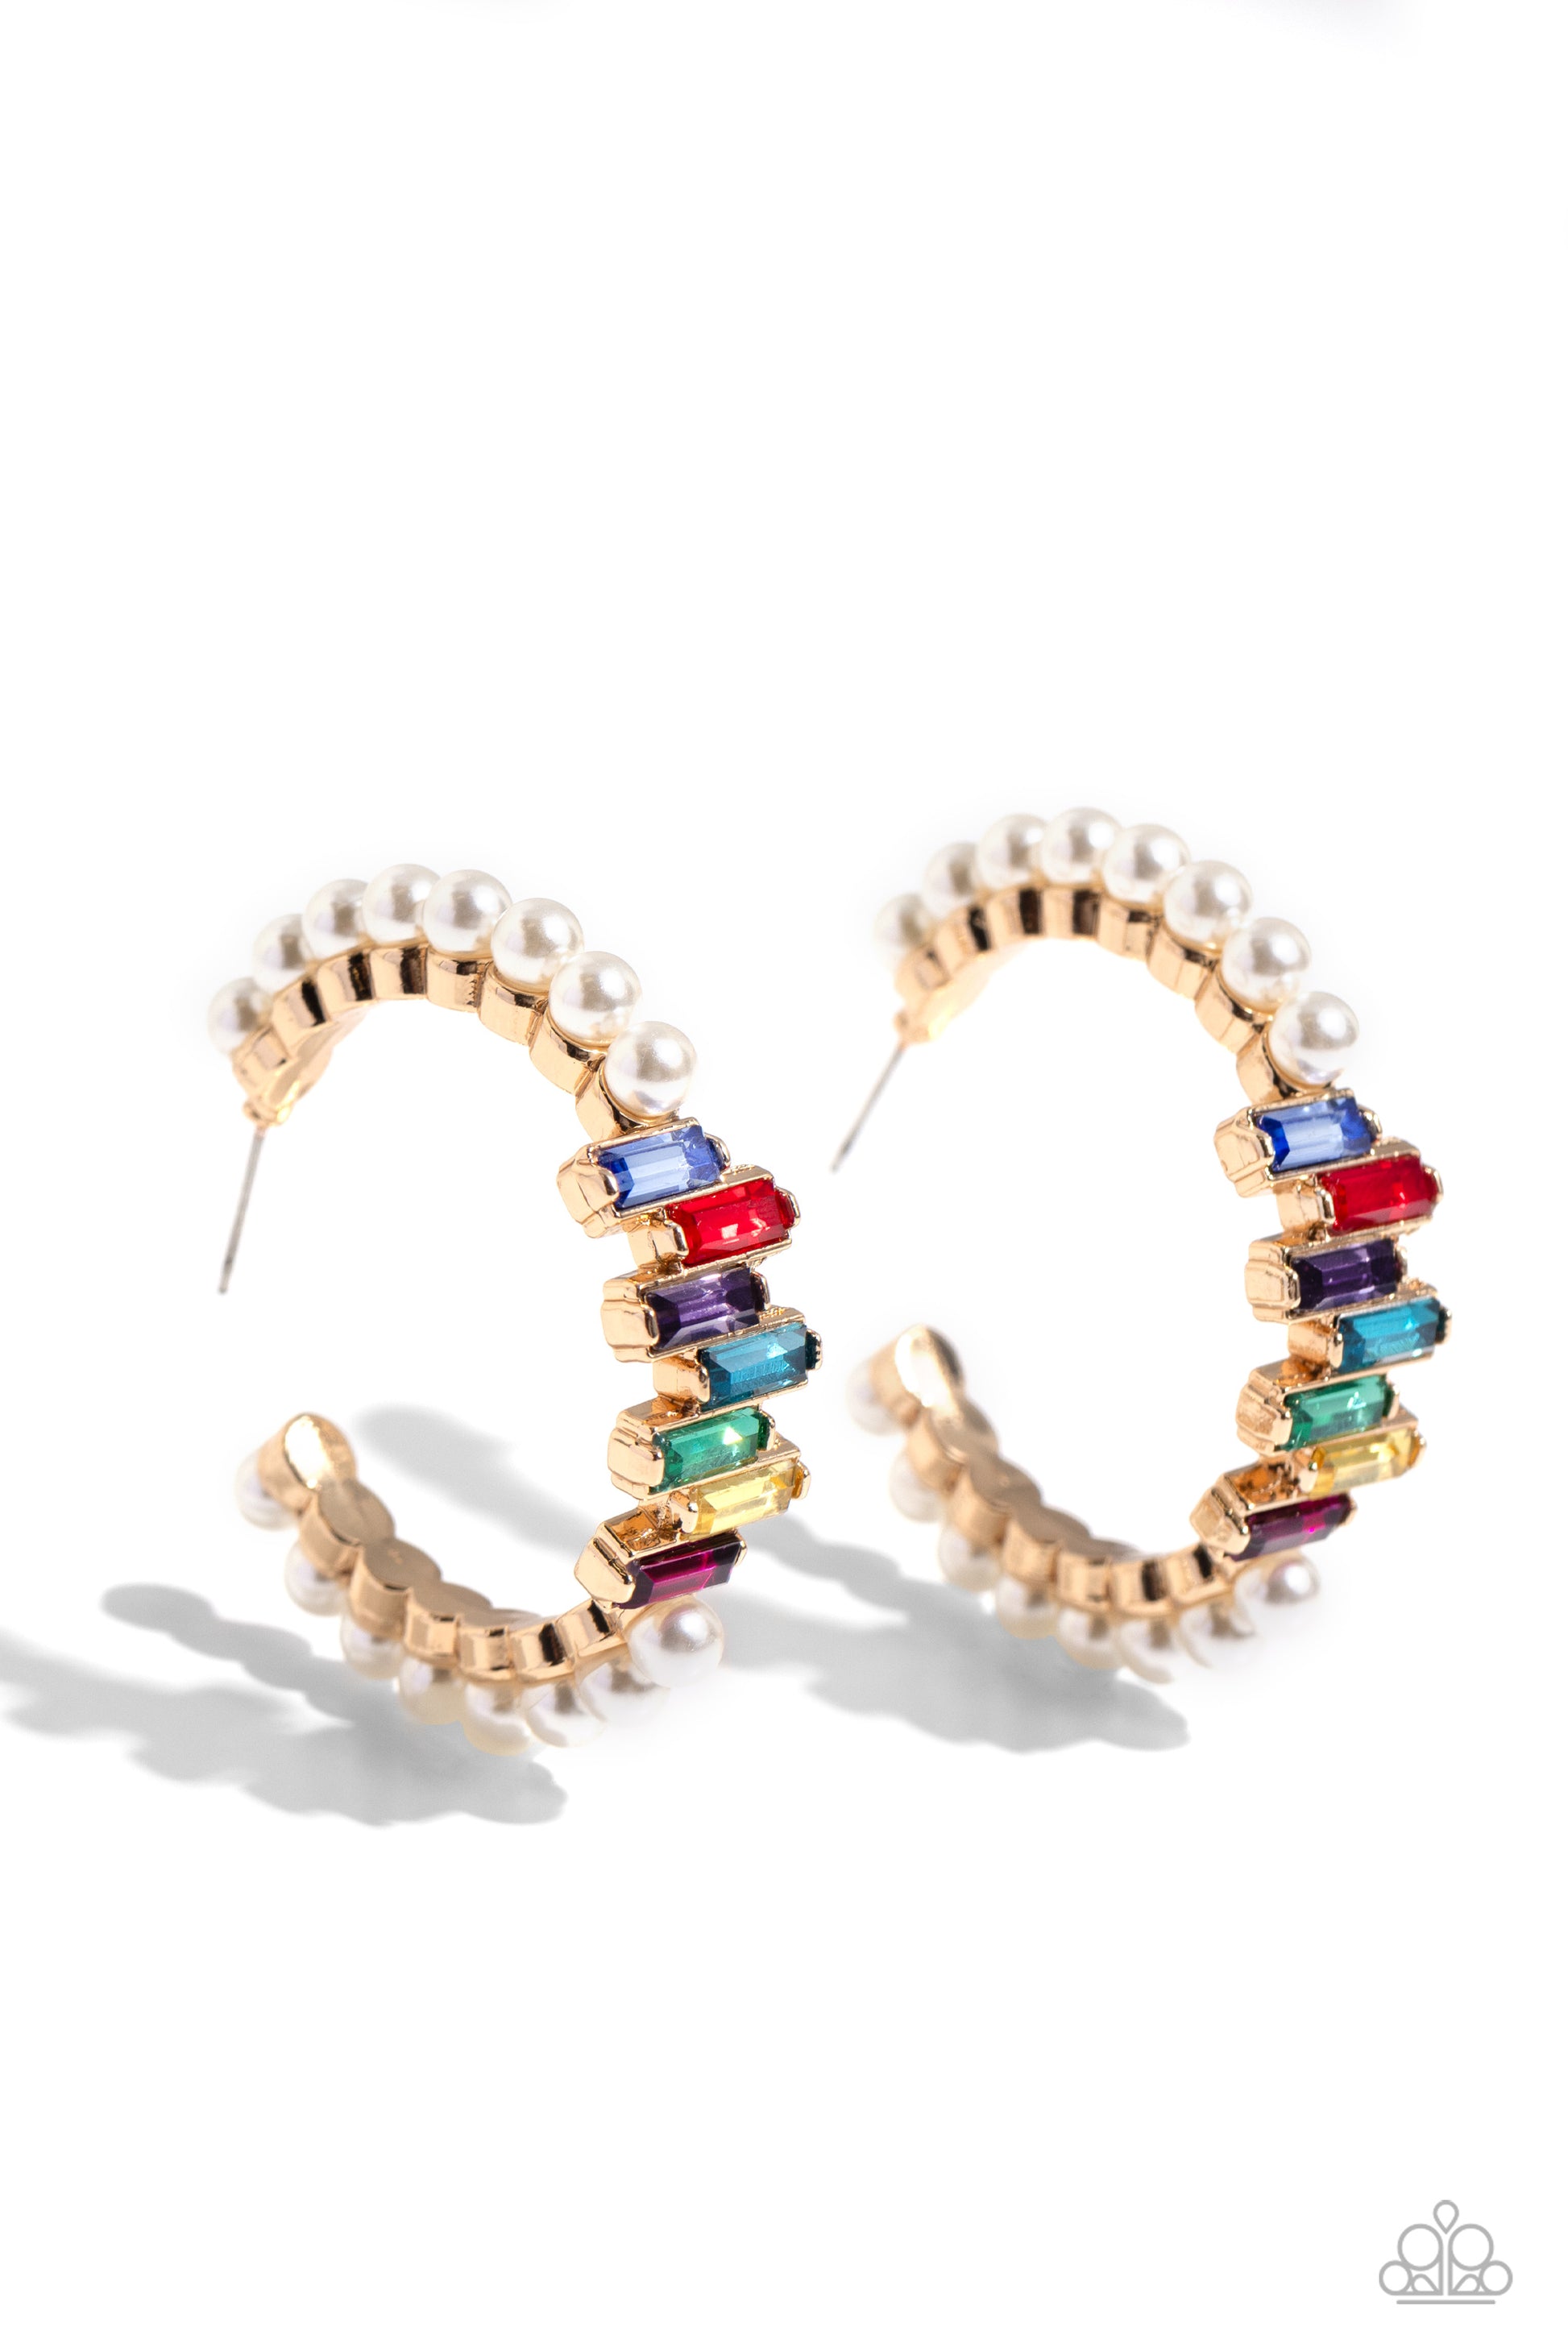 Modest Maven Gold Hoop Earring - Paparazzi Accessories Floating atop sleek gold fittings, a glamorous collection of classic white pearls, interrupted by a collection of staggered multicolored emerald-cut gems, delicately coalesces around a gold hoop for a sparkly statement. Earring attaches to a standard post fitting. Hoop measures approximately 1 3/4" in diameter. Sold as one pair of hoop earrings. SKU: P5HO-GDXX-320XX